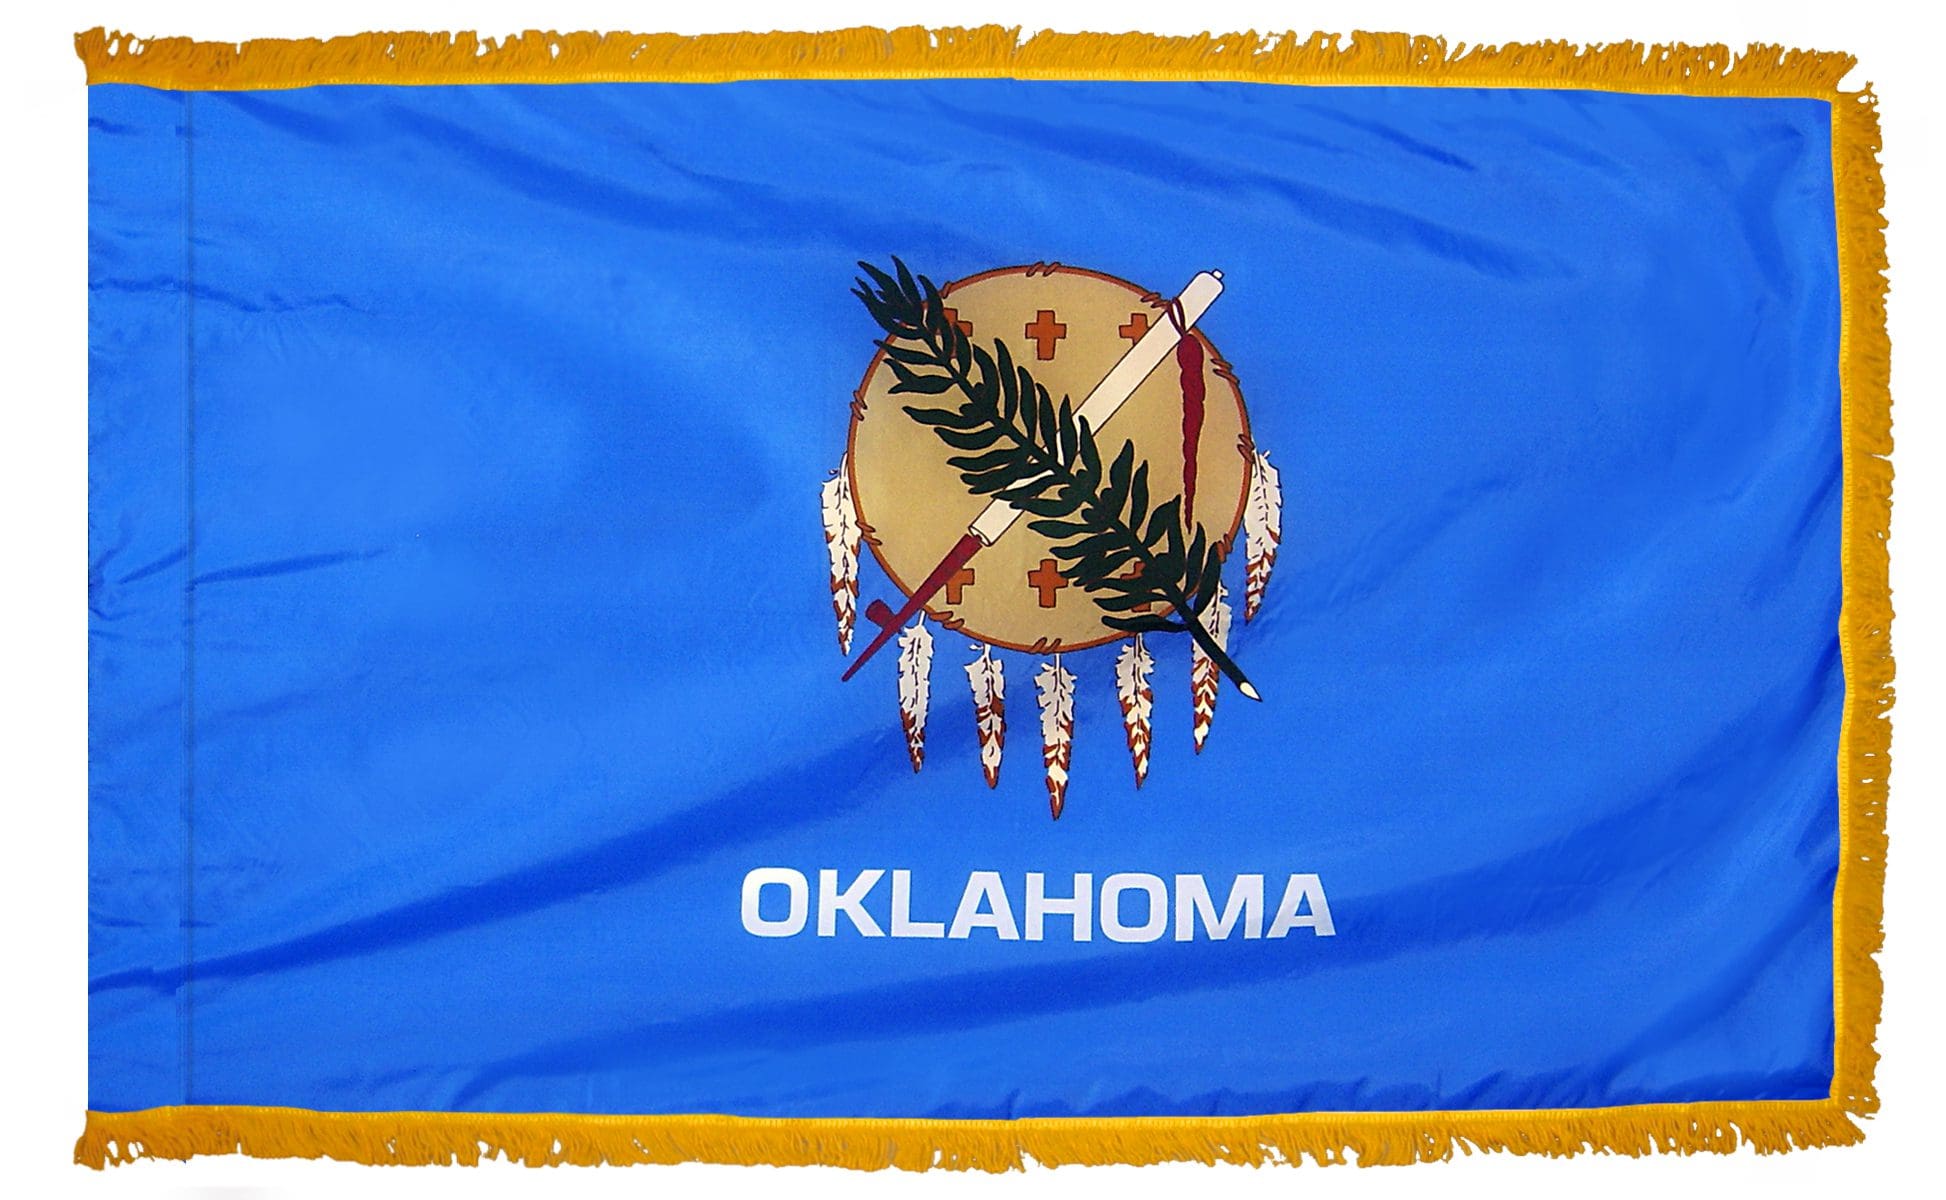 Oklahoma State Flag 3x5 or 4x6 ft. (Official)